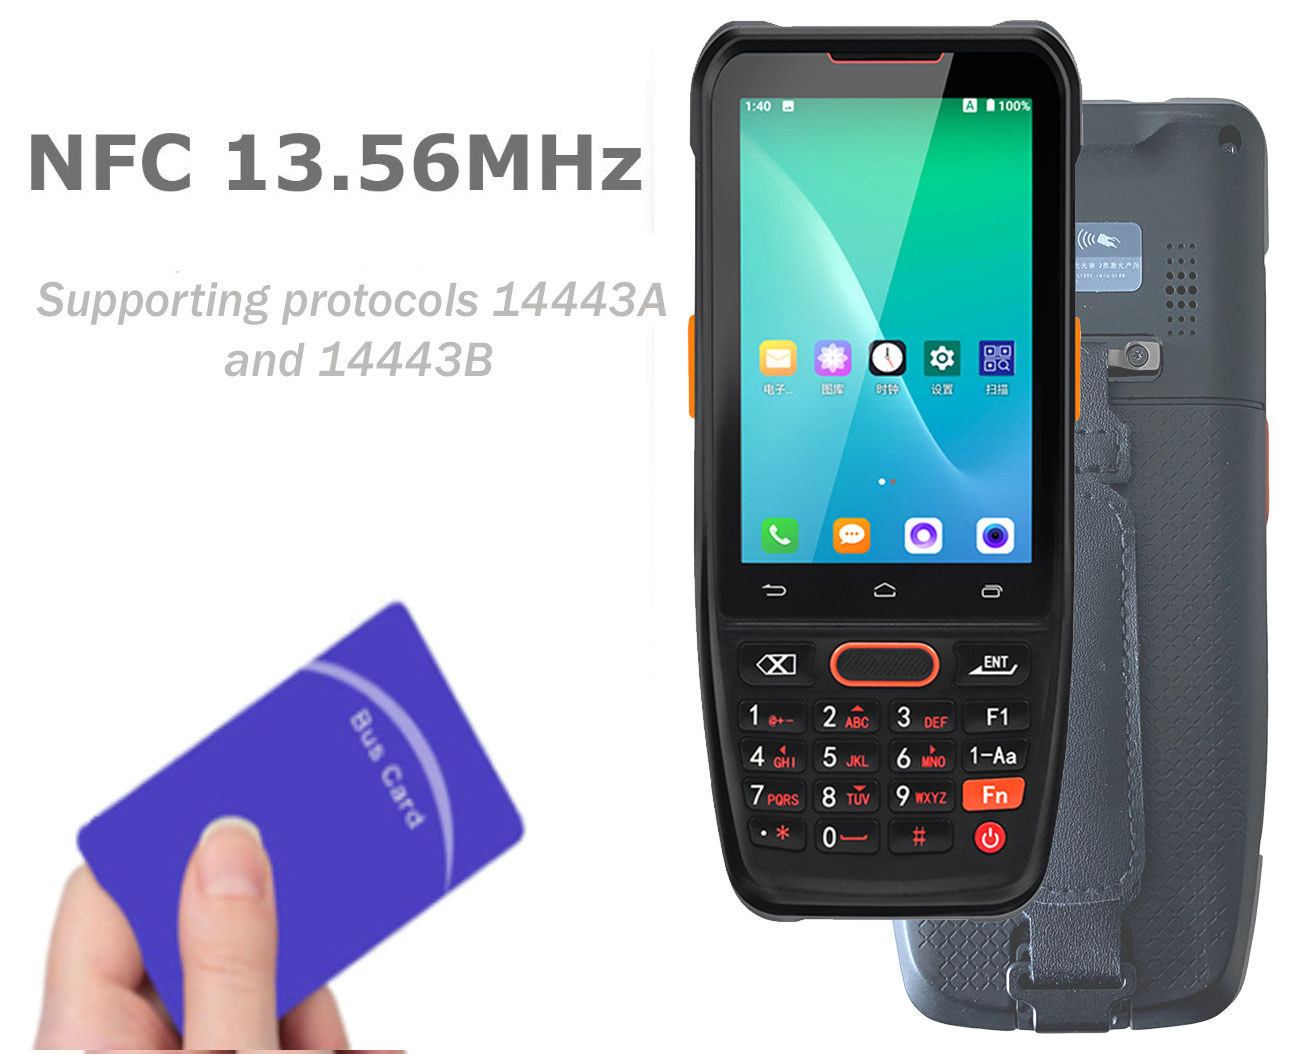 Senter ST917M with NFC function that allows data exchange over short distances